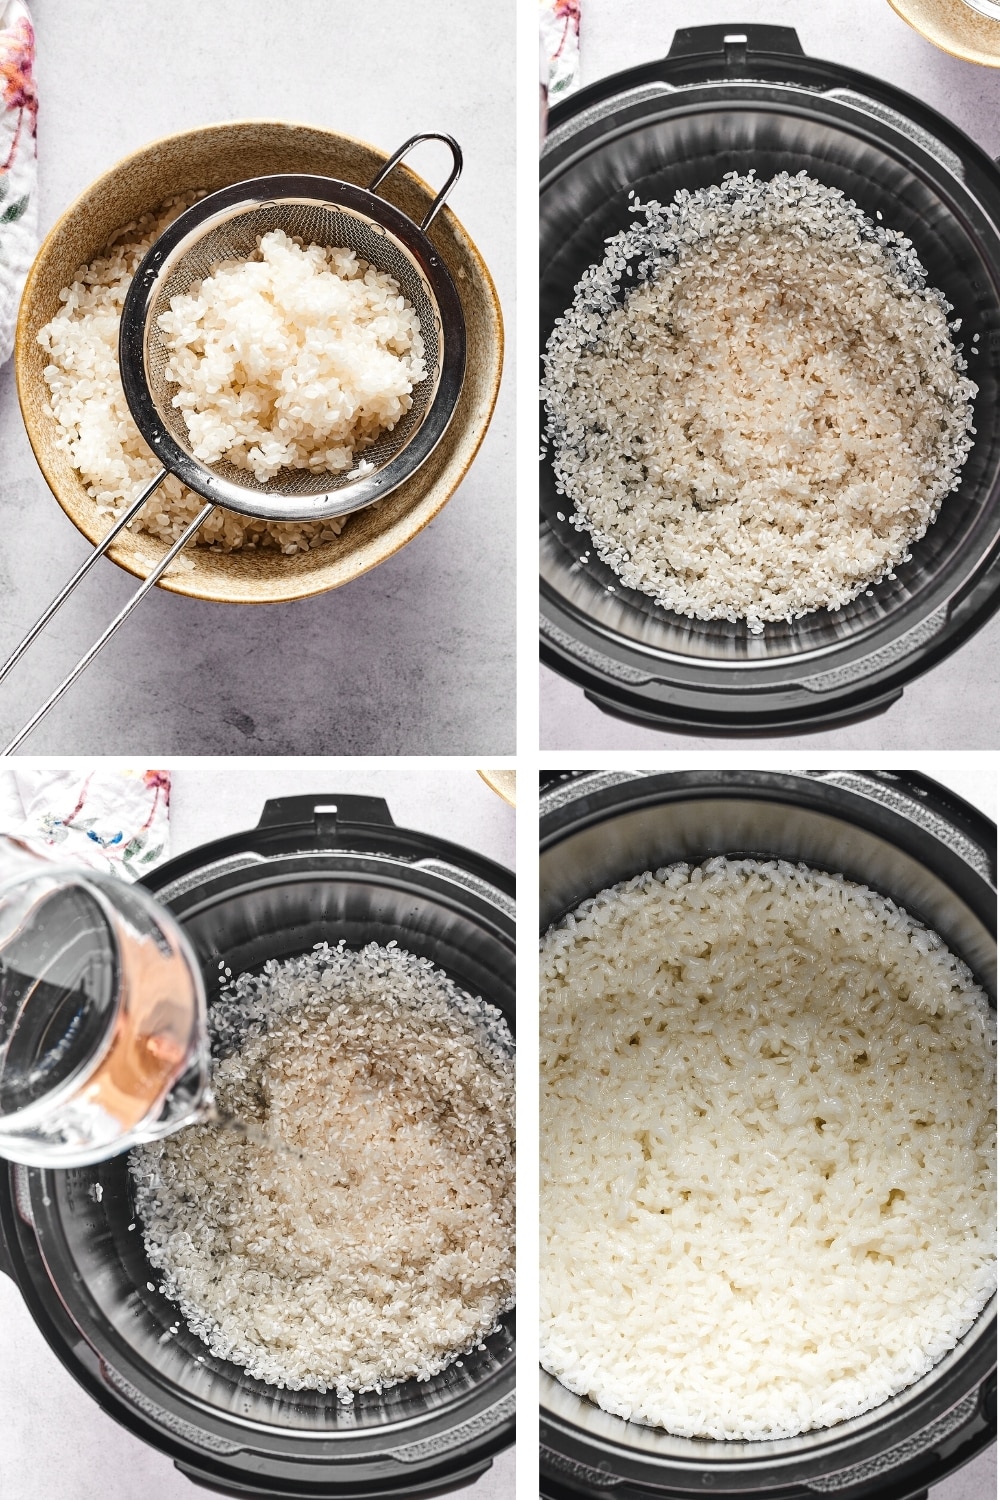 A four split picture showing the process of draining sushi rice, sushi rice in an instant pot, pouring water into the instant pot, and the sushi rice cooking.